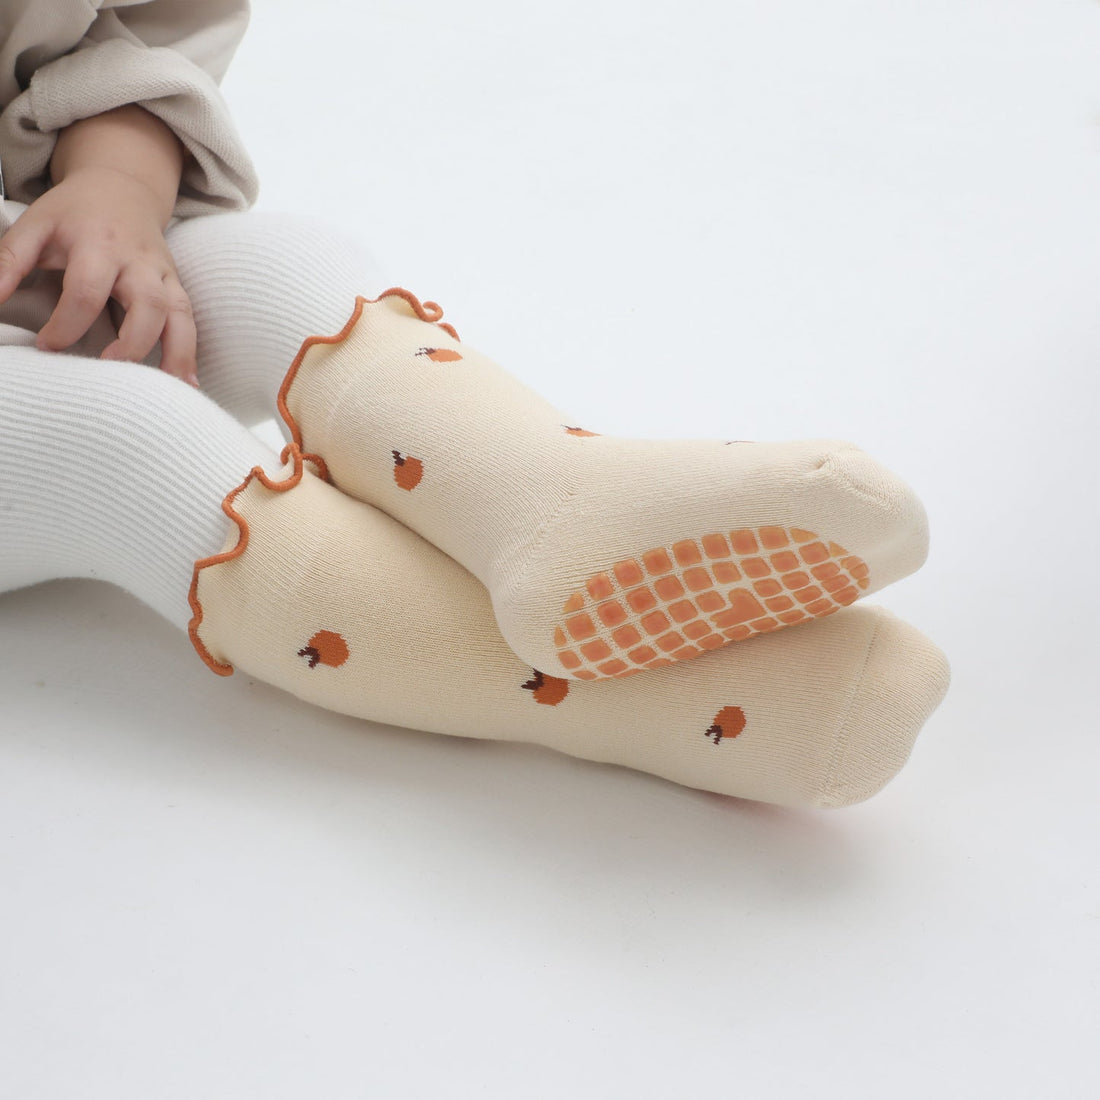 How Grip Socks for Toddlers Promote Safety and Confidence